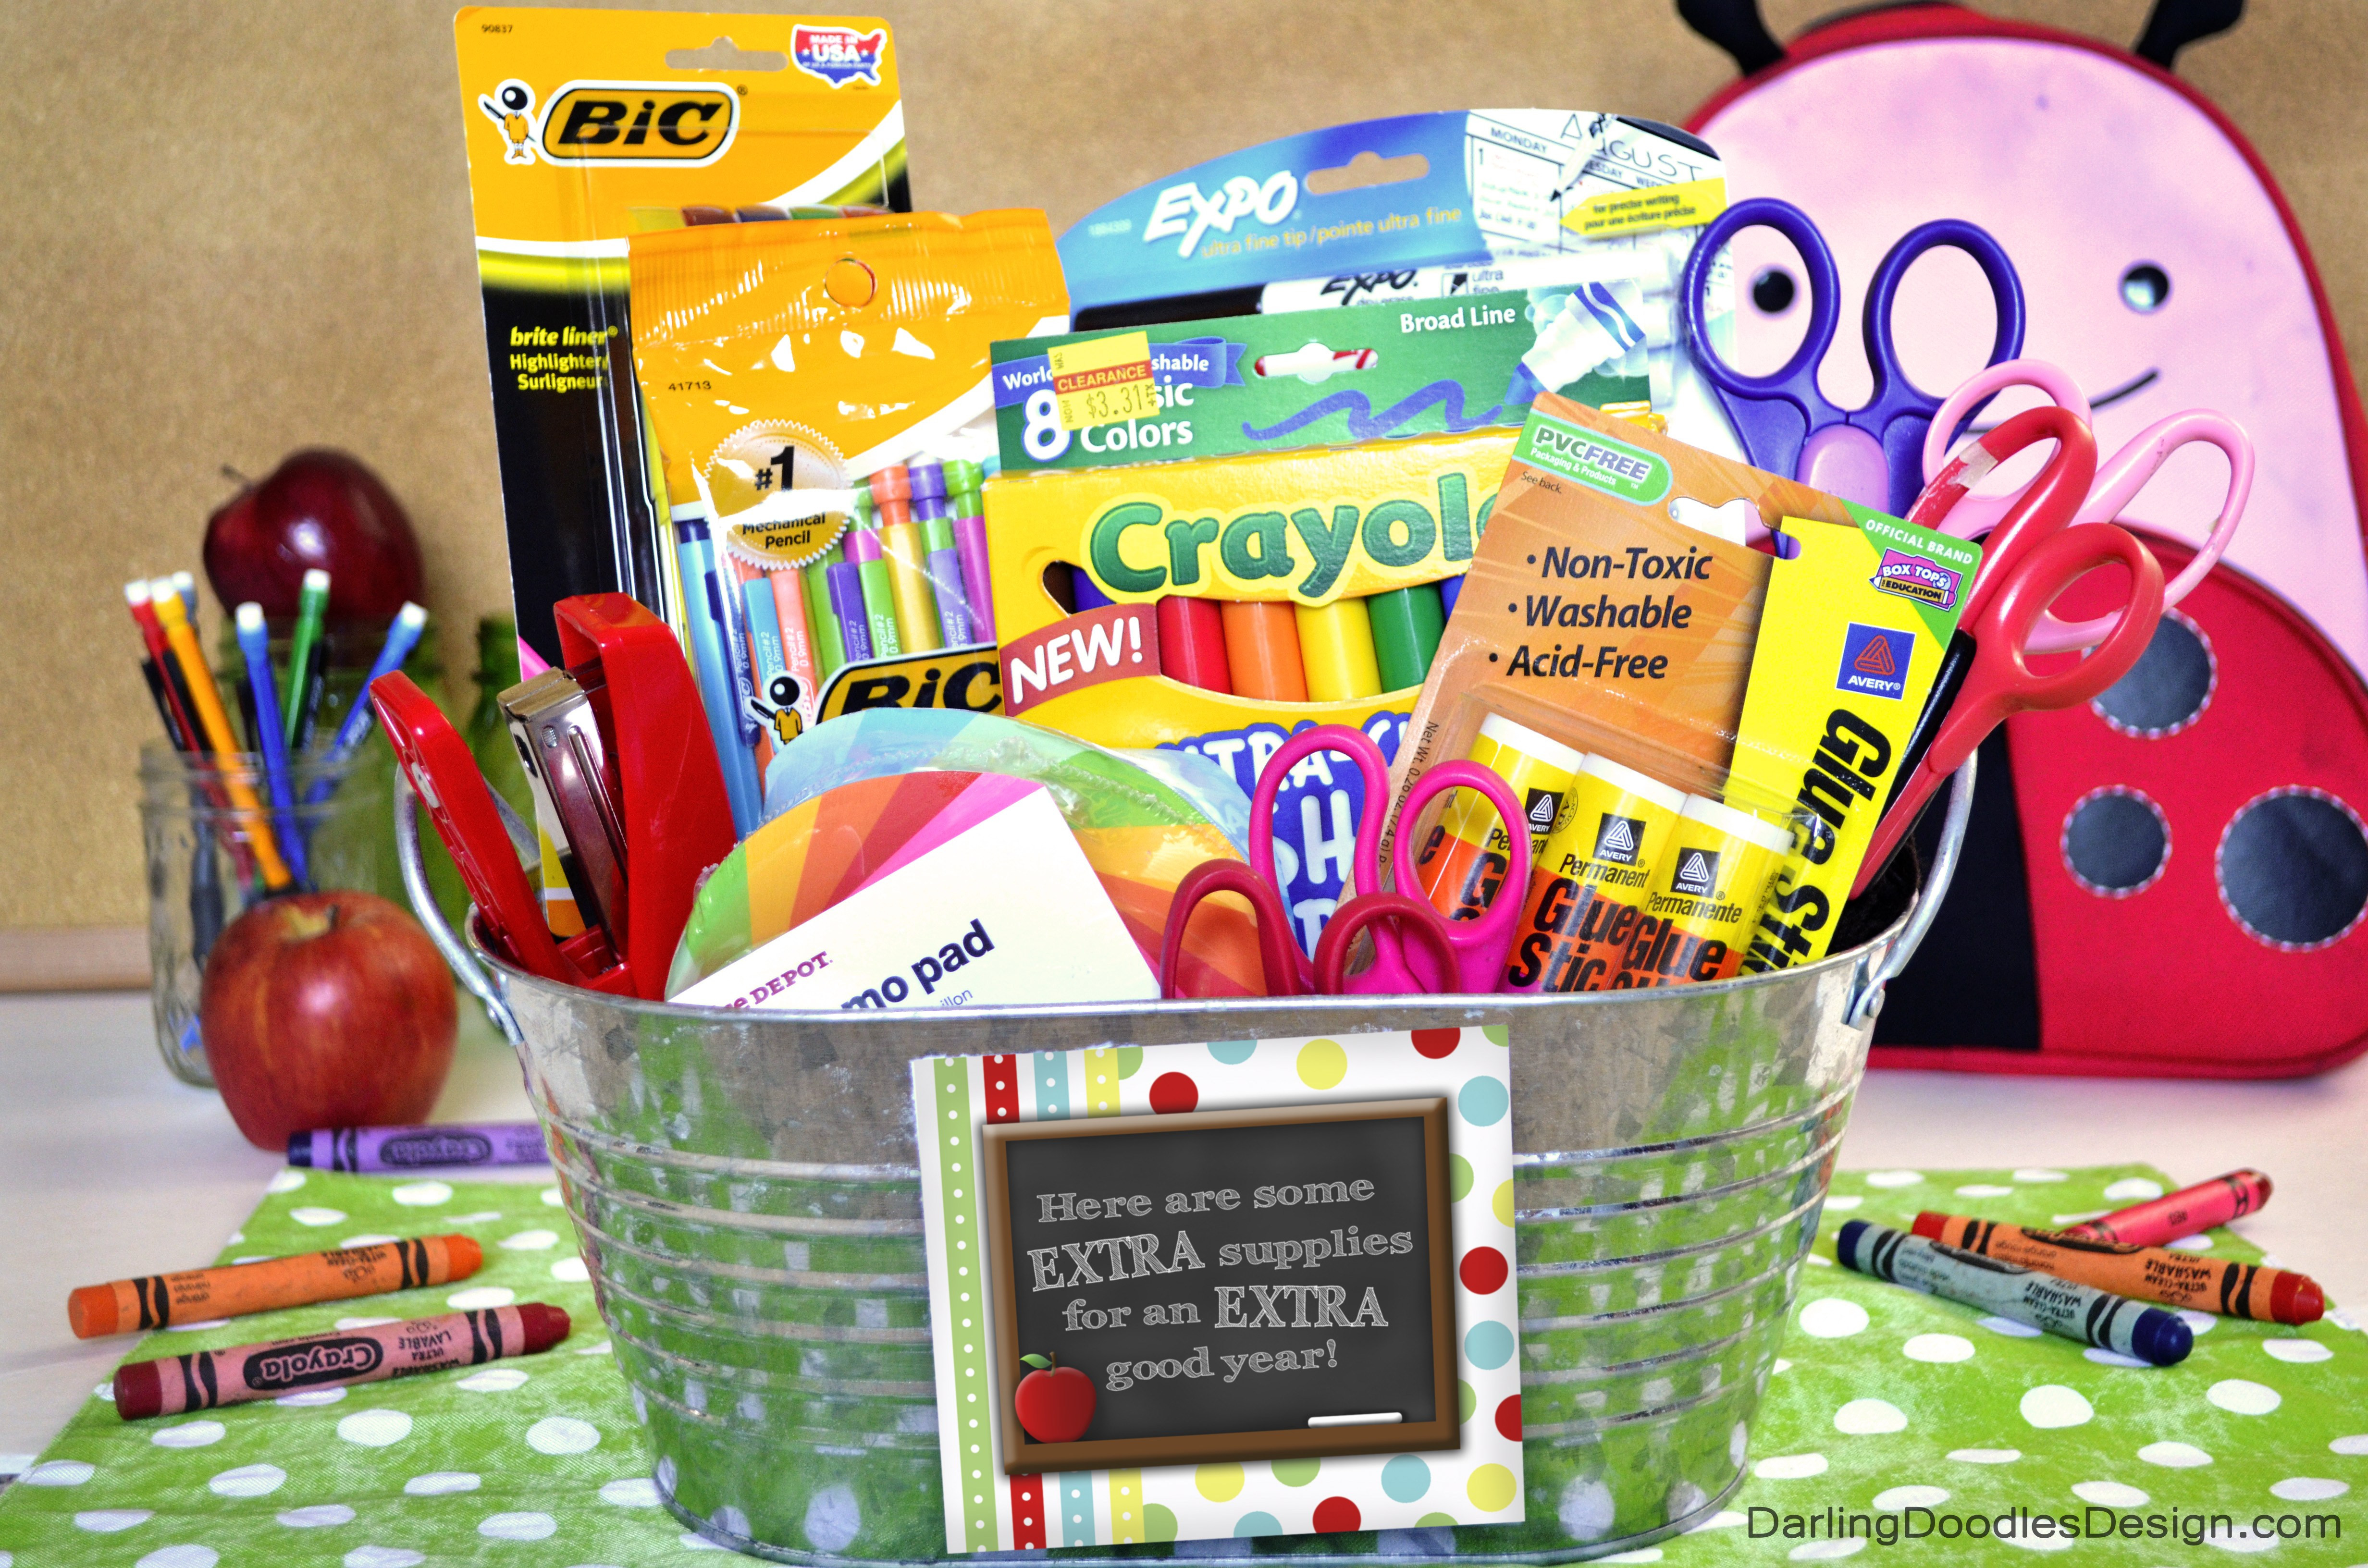 Gift Basket Ideas For Teachers
 "Extra" Fun Back to School Gift Idea Darling Doodles